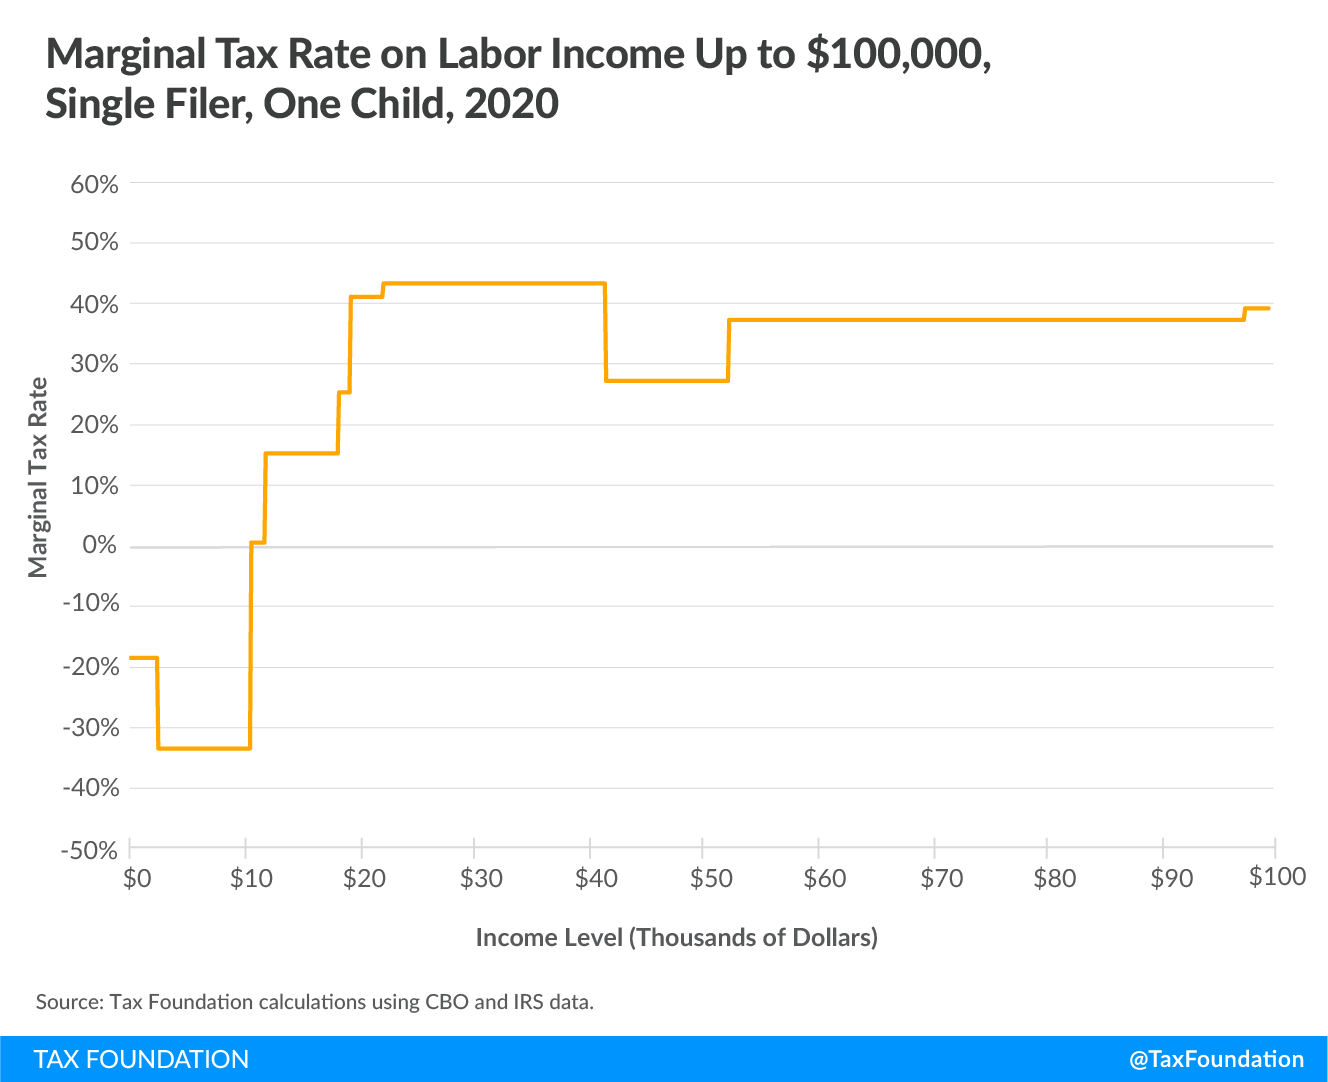 Marginal tax rate on labor income up to $100,000 single filer, one child 2020, Marginal Tax Rates on Labor Income in the U.S. After the Tax Cuts and Jobs Act 